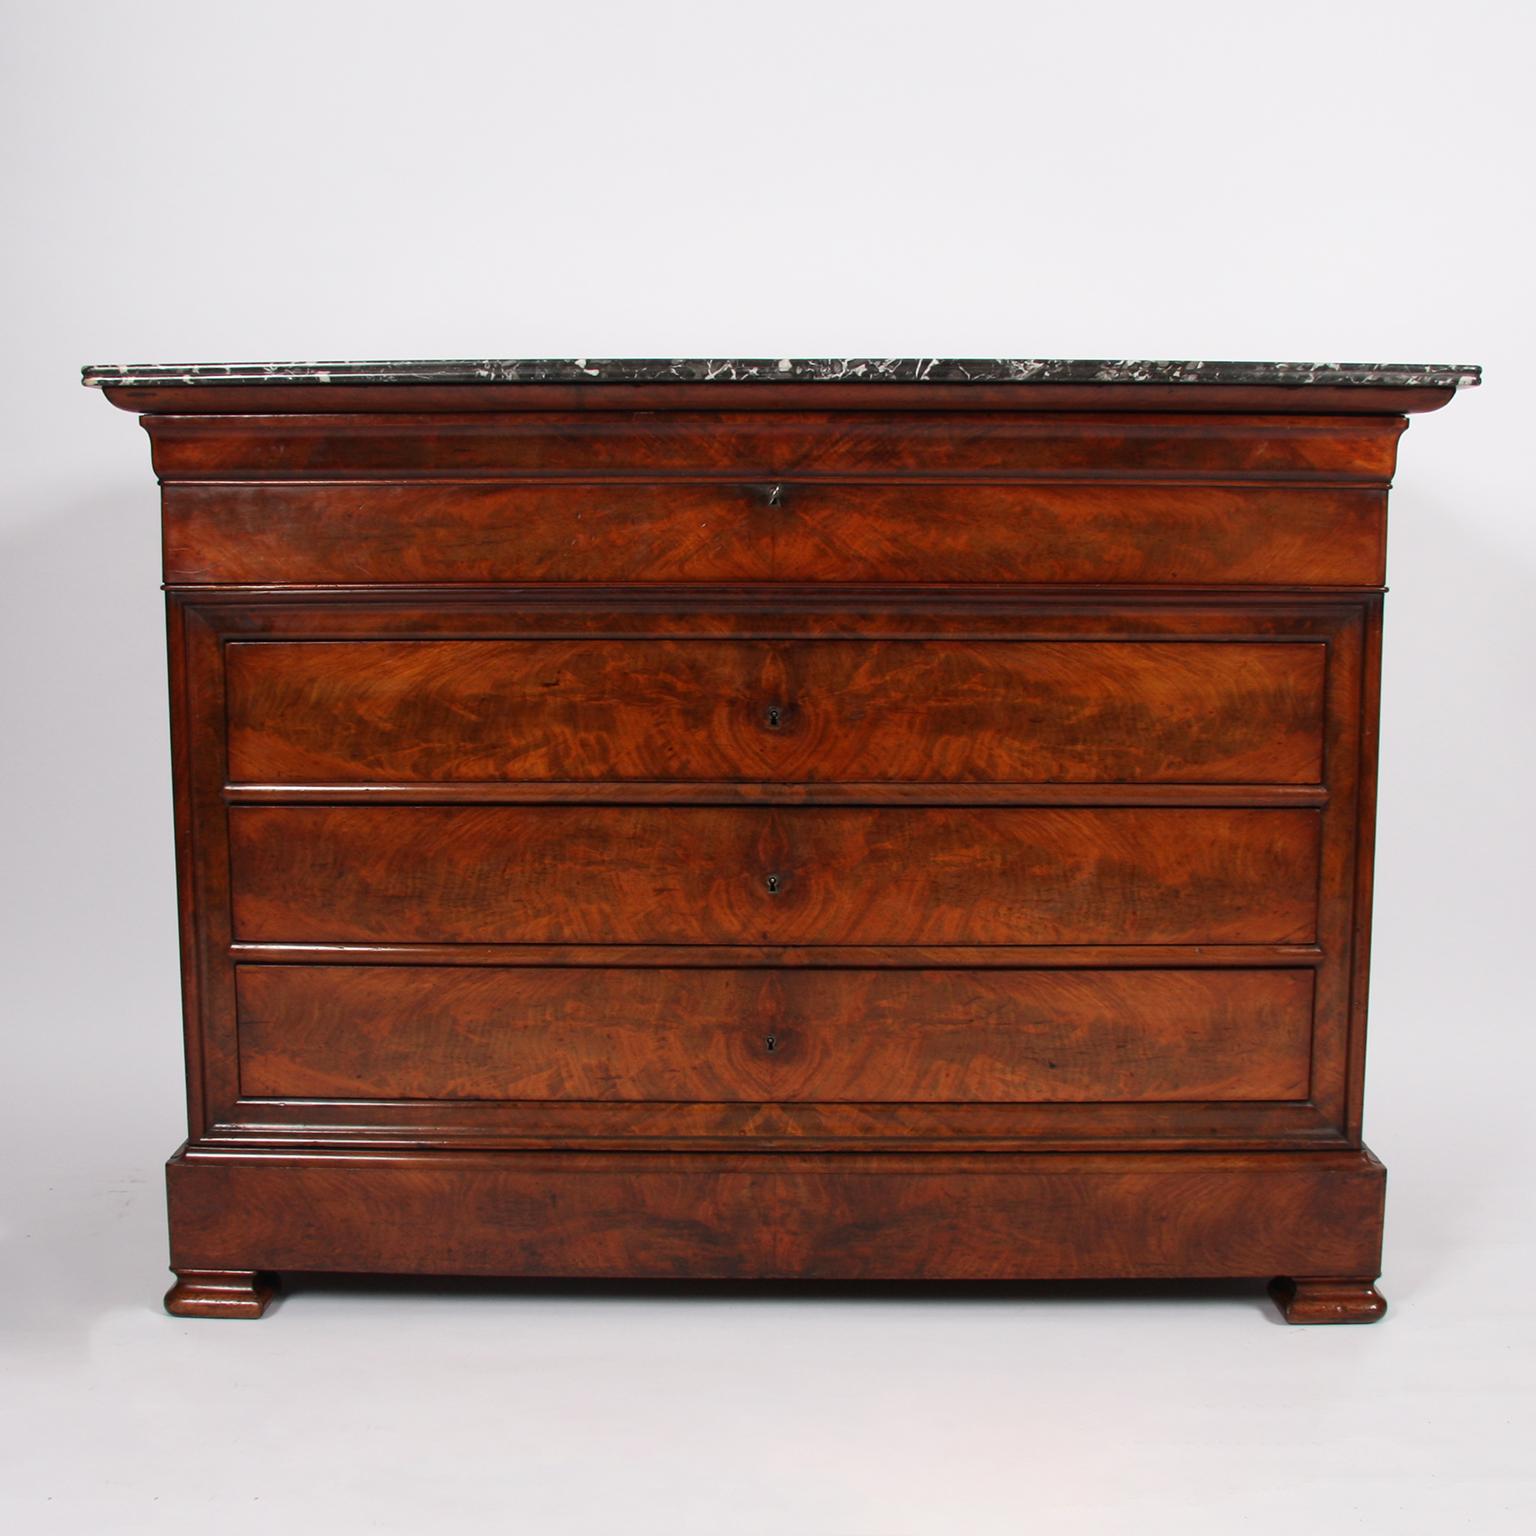 French, 19th century

An elegant, marble top, secretaire chest. 

With three drawers, a fold down desk with leather writing surface and a hidden drawer. 

Key present. 

In excellent condition.